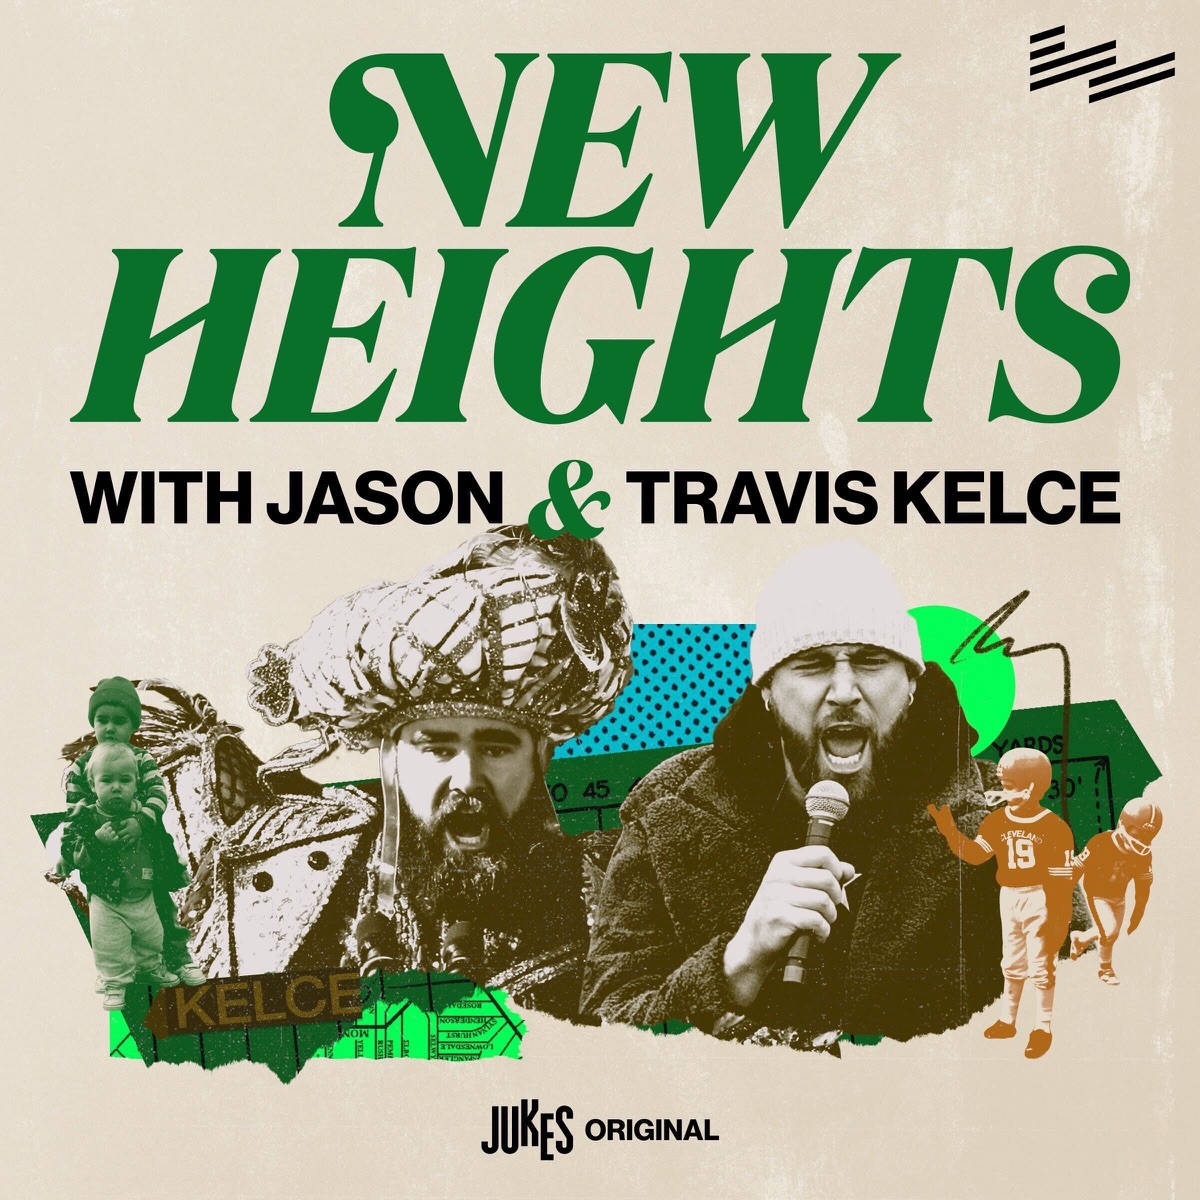 New Heights with Jason and Travis Kelce – Podcast – Podtail